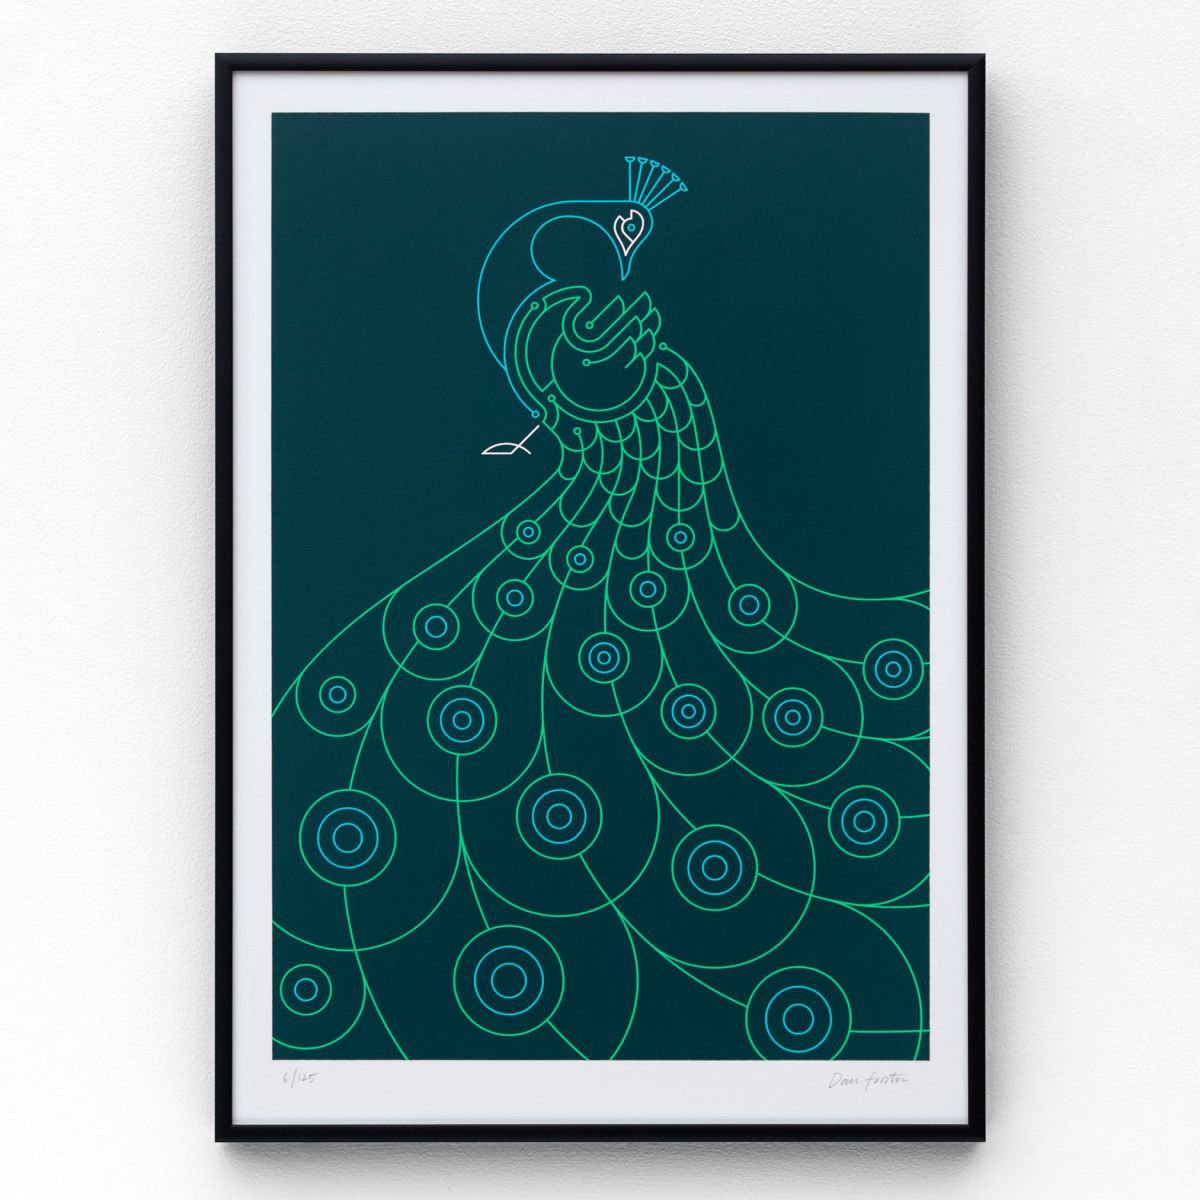 Peacock A3 limited edition screen print by The Lost Fox